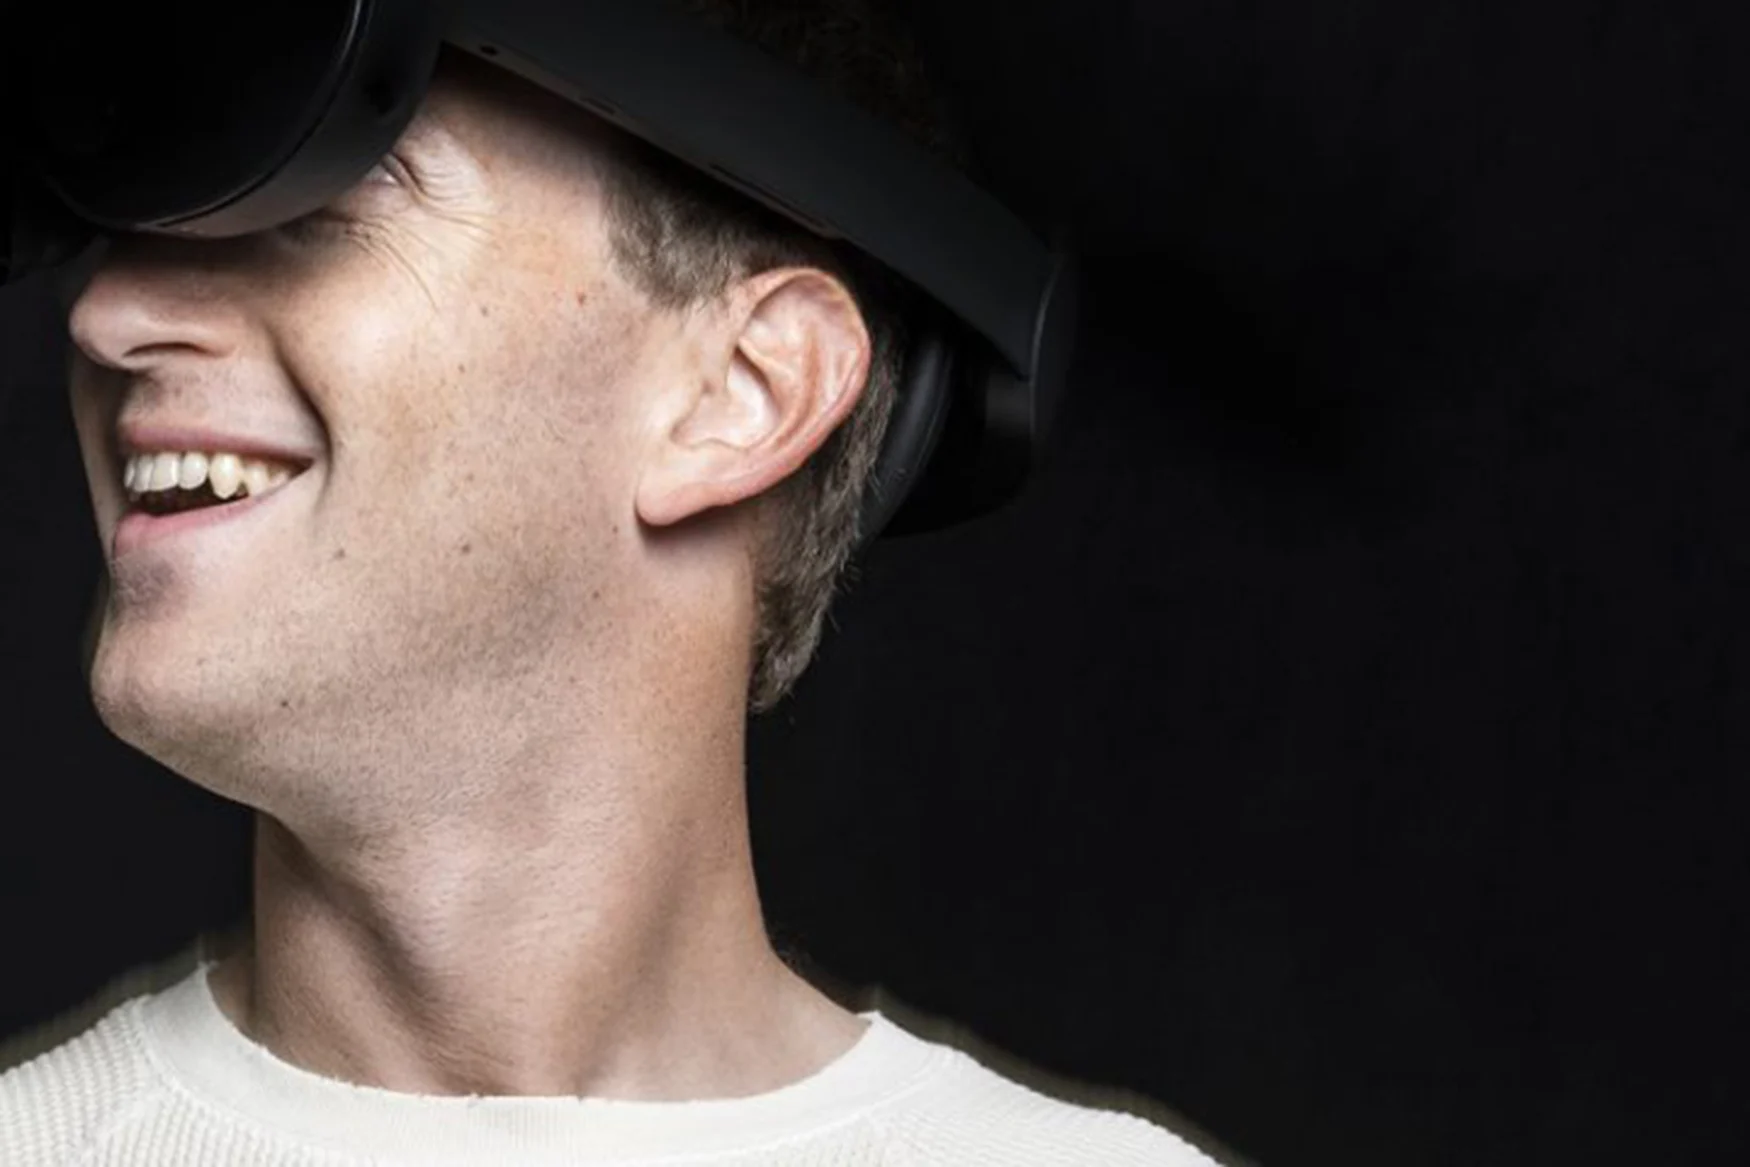 Mark Zuckerberg on what is likely to be the company's new VR headset.